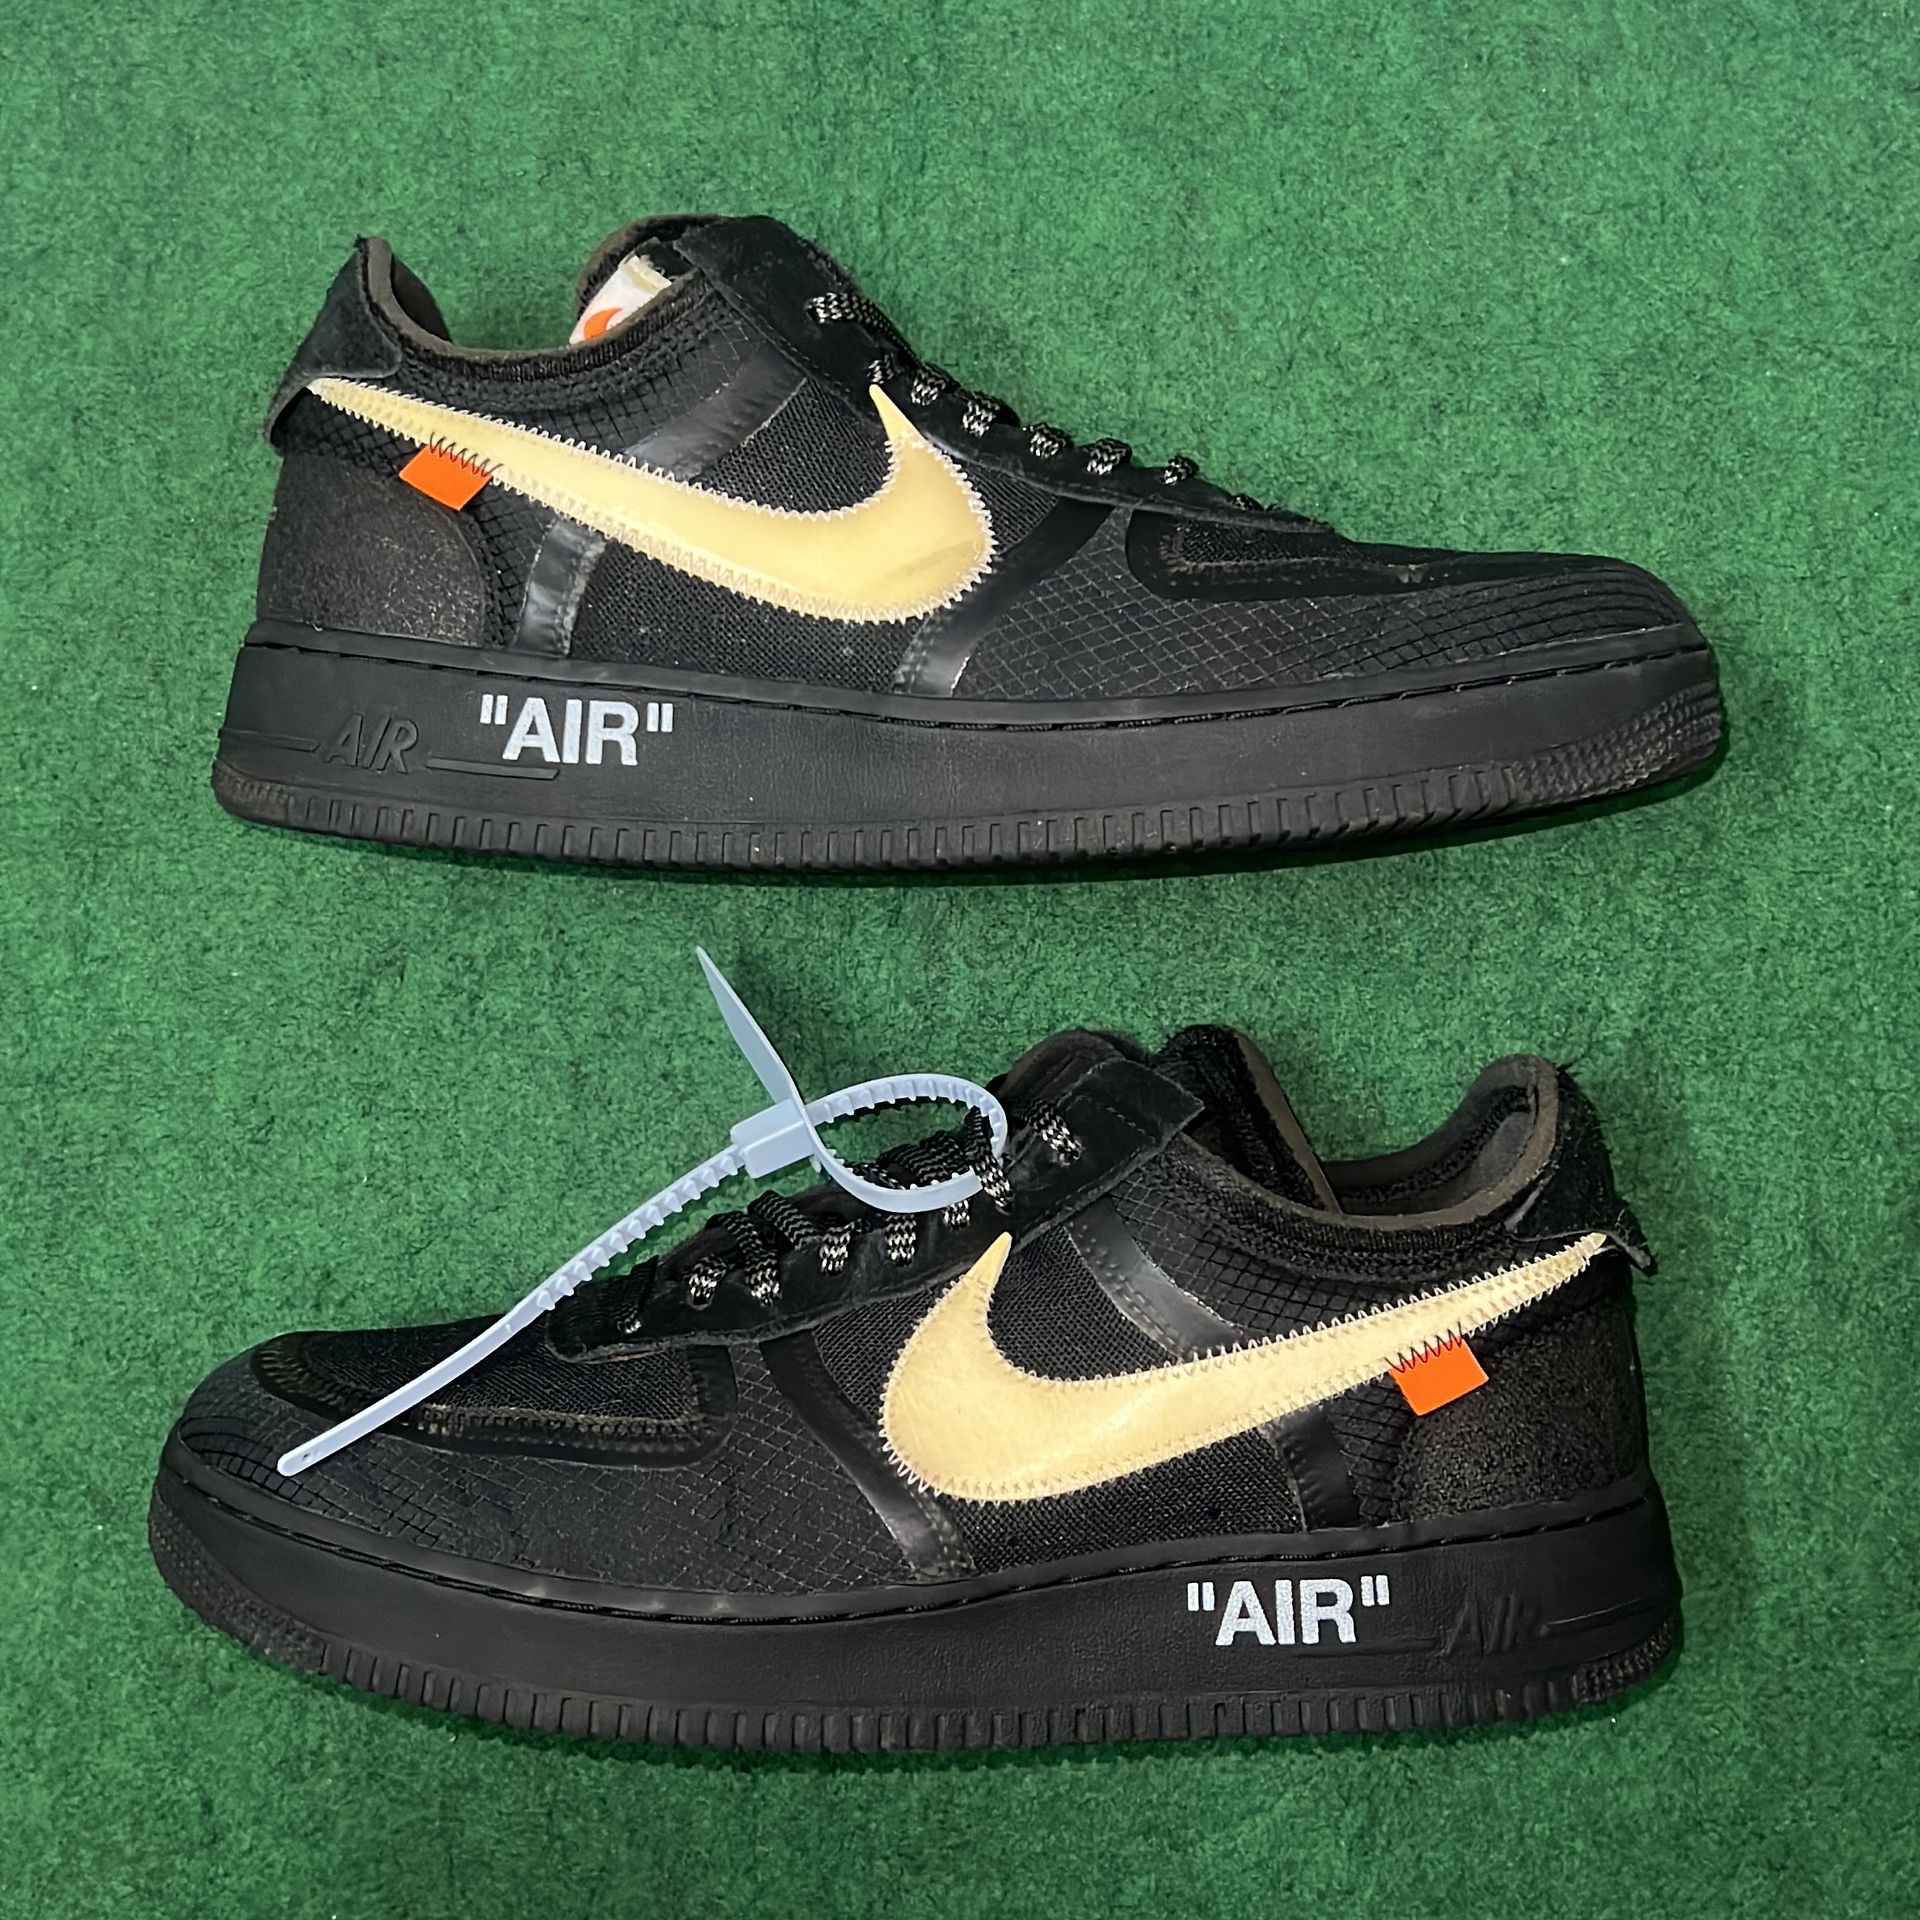 Nike OFF-WHITE x Air Force 1 Low 'Black'